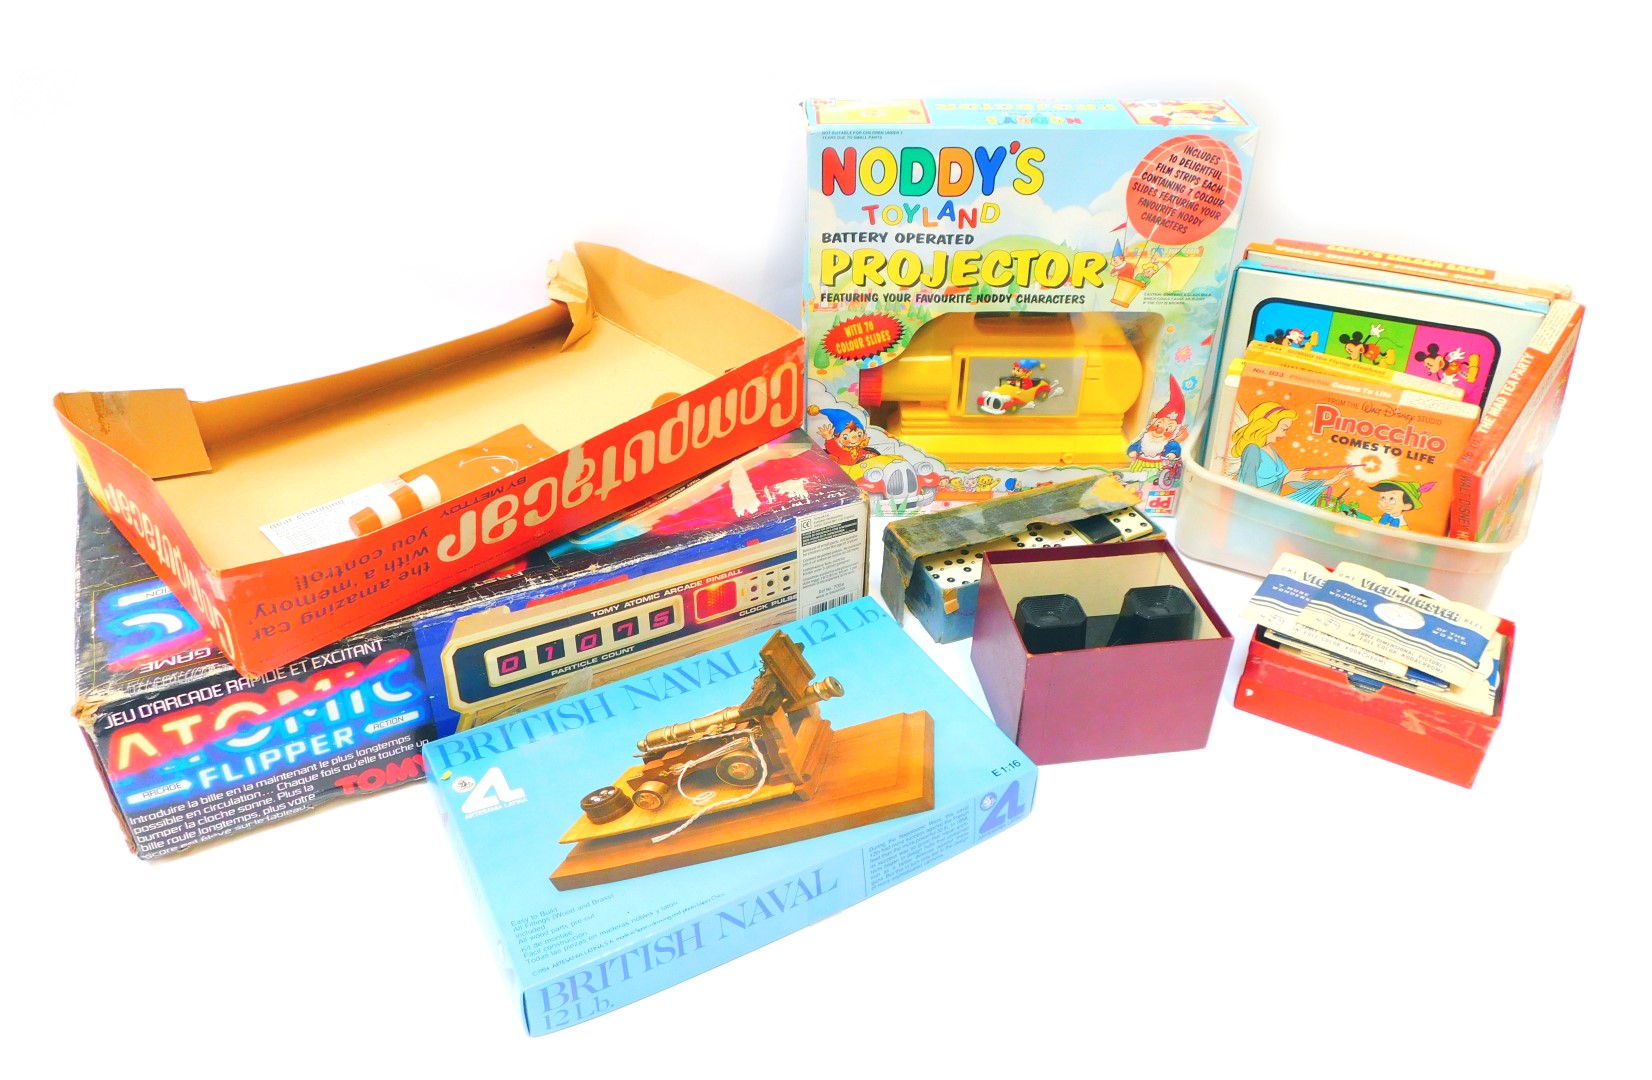 Various toys and games, comprising Atomic Pinball by Tomy, Noddy's Toy Land projector, View Master a